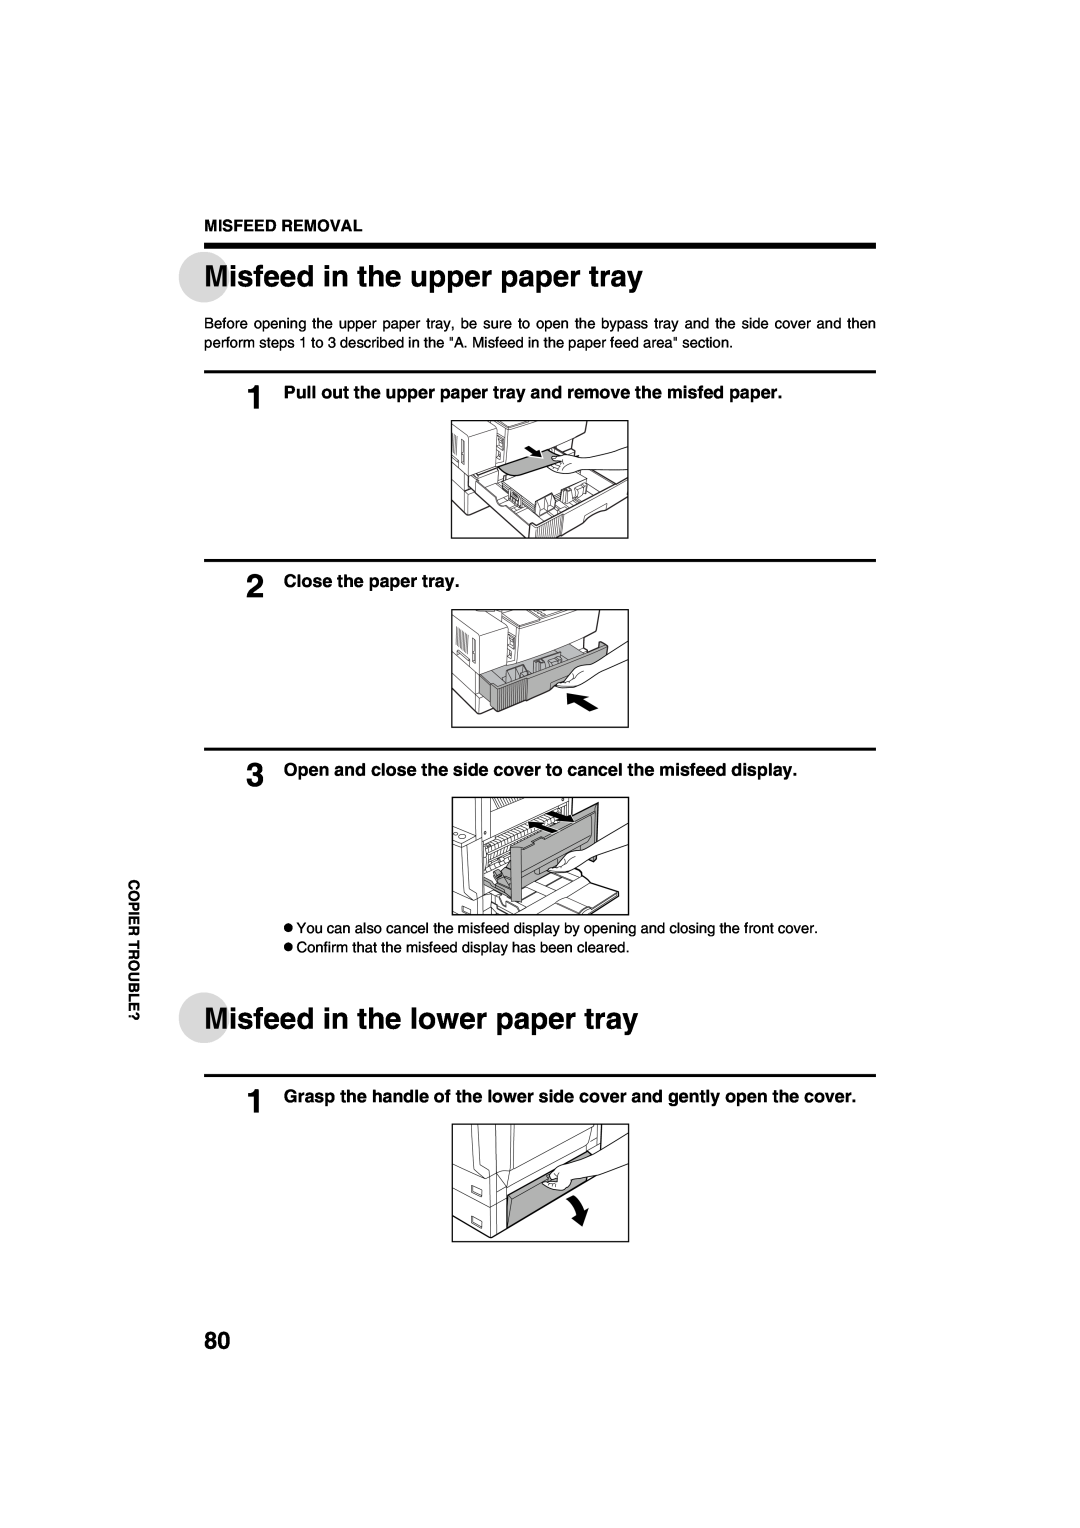 Sharp AR-M208 operation manual Misfeed in the upper paper tray, Misfeed in the lower paper tray, Close the paper tray 